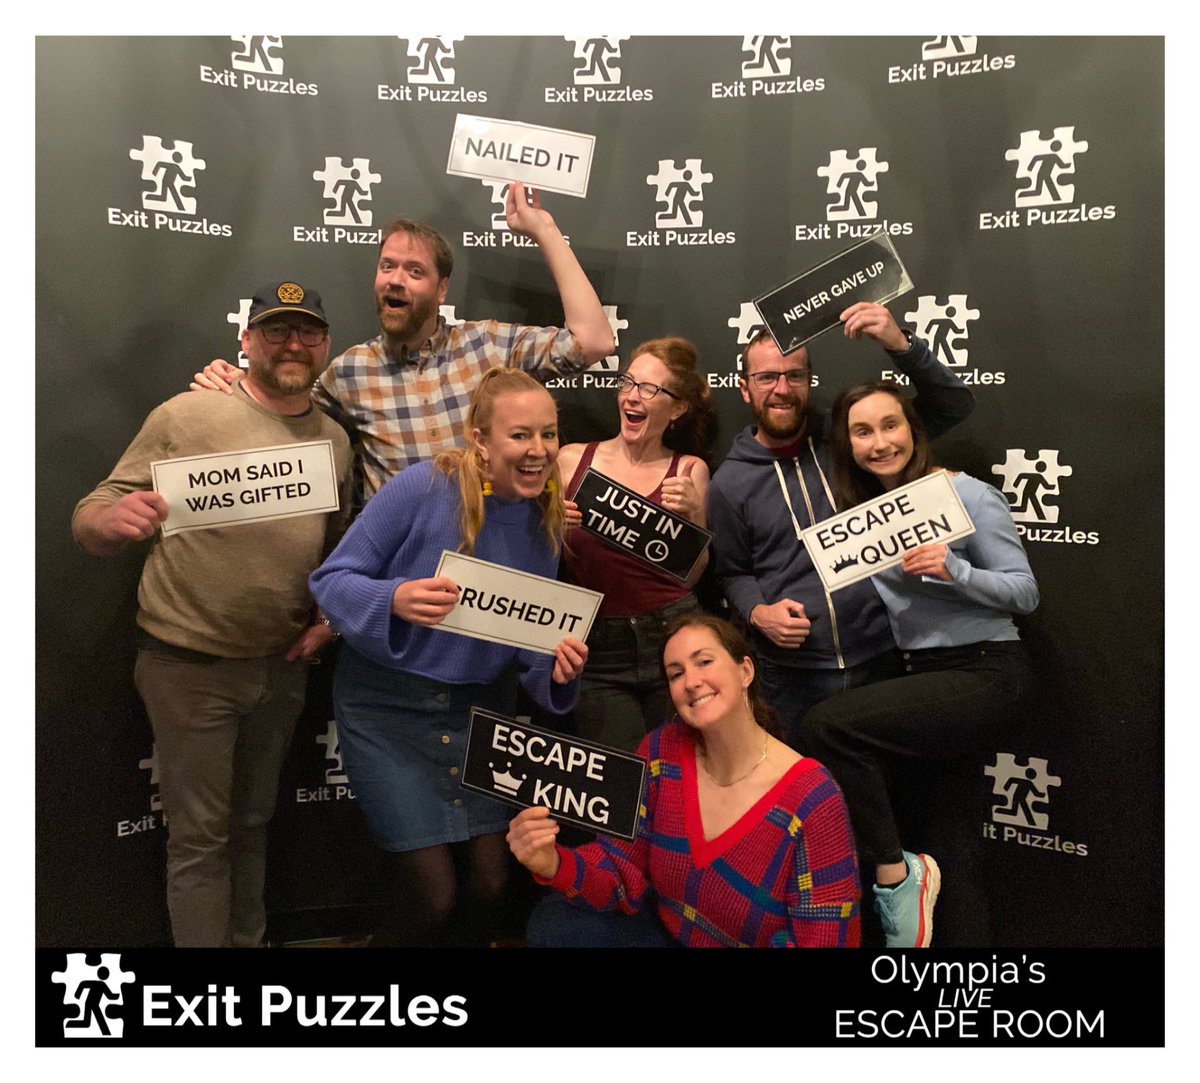 Escaped with 55 seconds remaining! 
Fantastic teamwork everyone! That was a close one 😜

ExitPuzzles.com - Olympia Escape Room 

#EscapeRoom #EscapeRooms #Olympia #WashingtonState